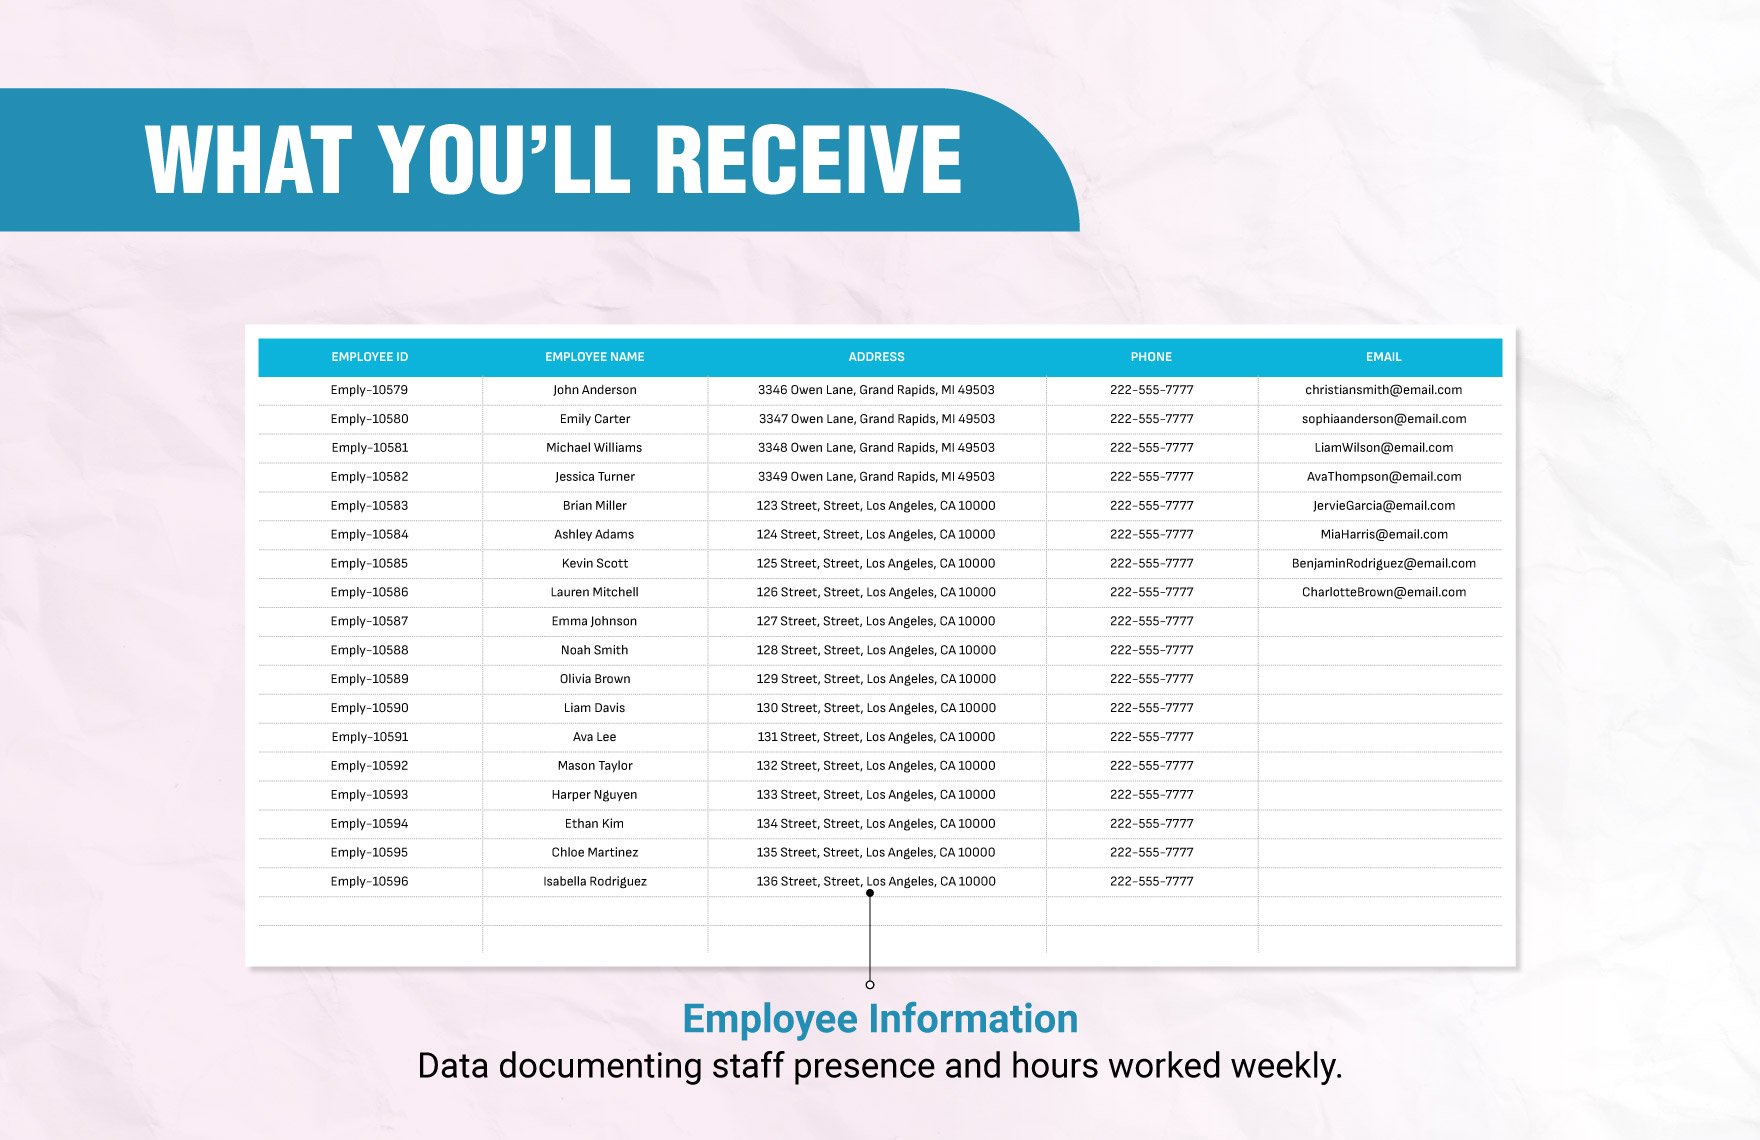 Weekly Employee Sign in Sheet Template